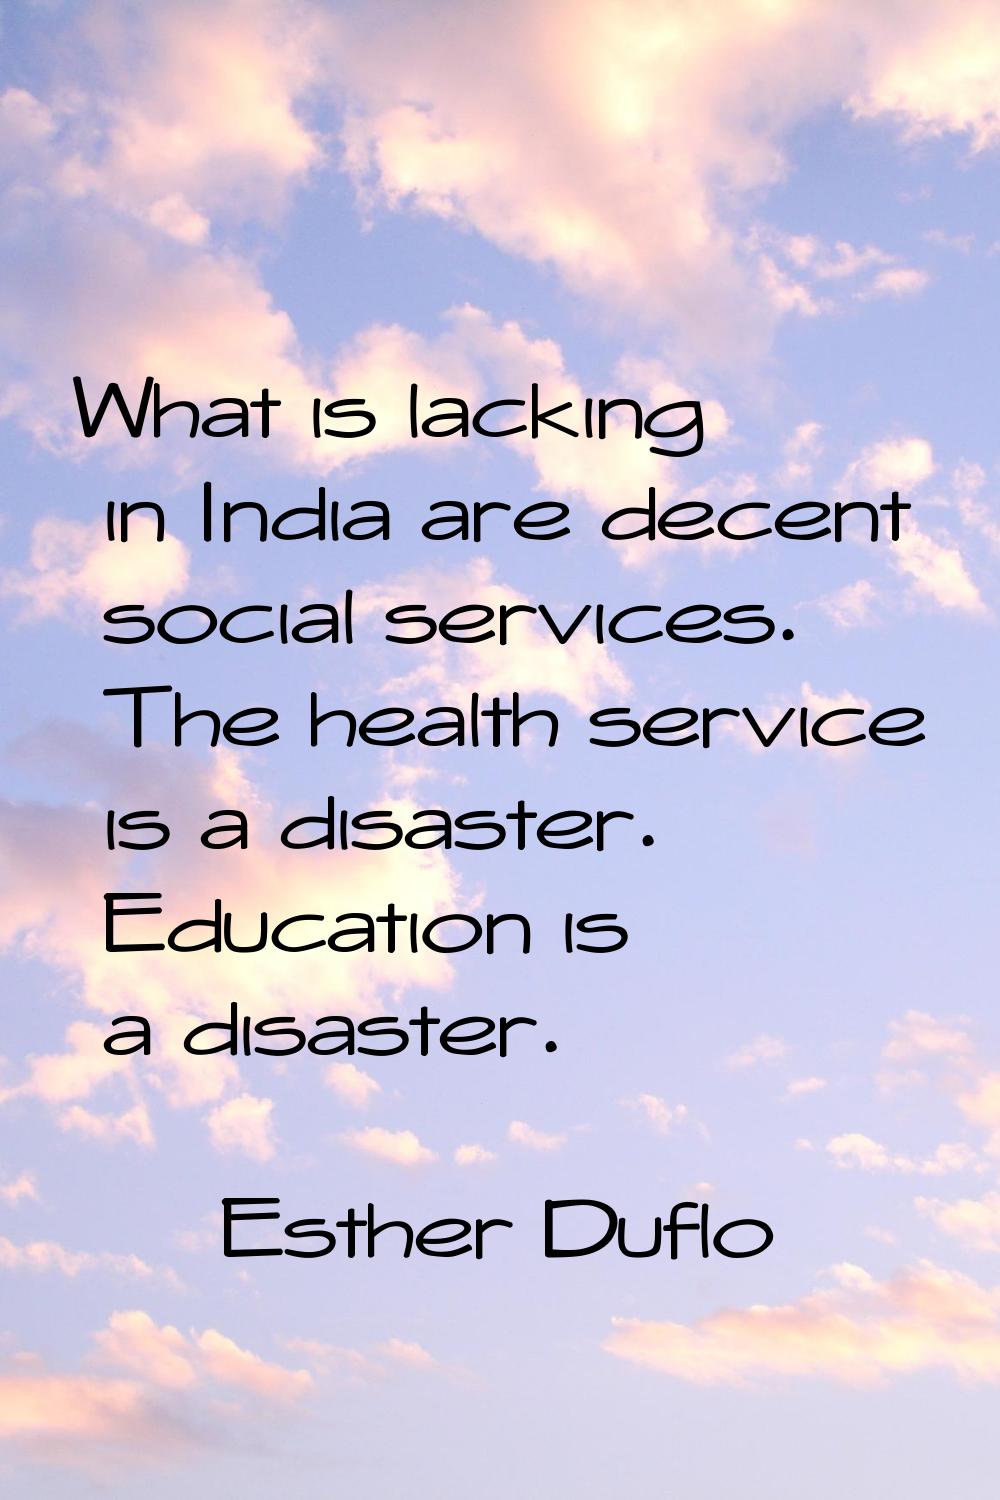 What is lacking in India are decent social services. The health service is a disaster. Education is